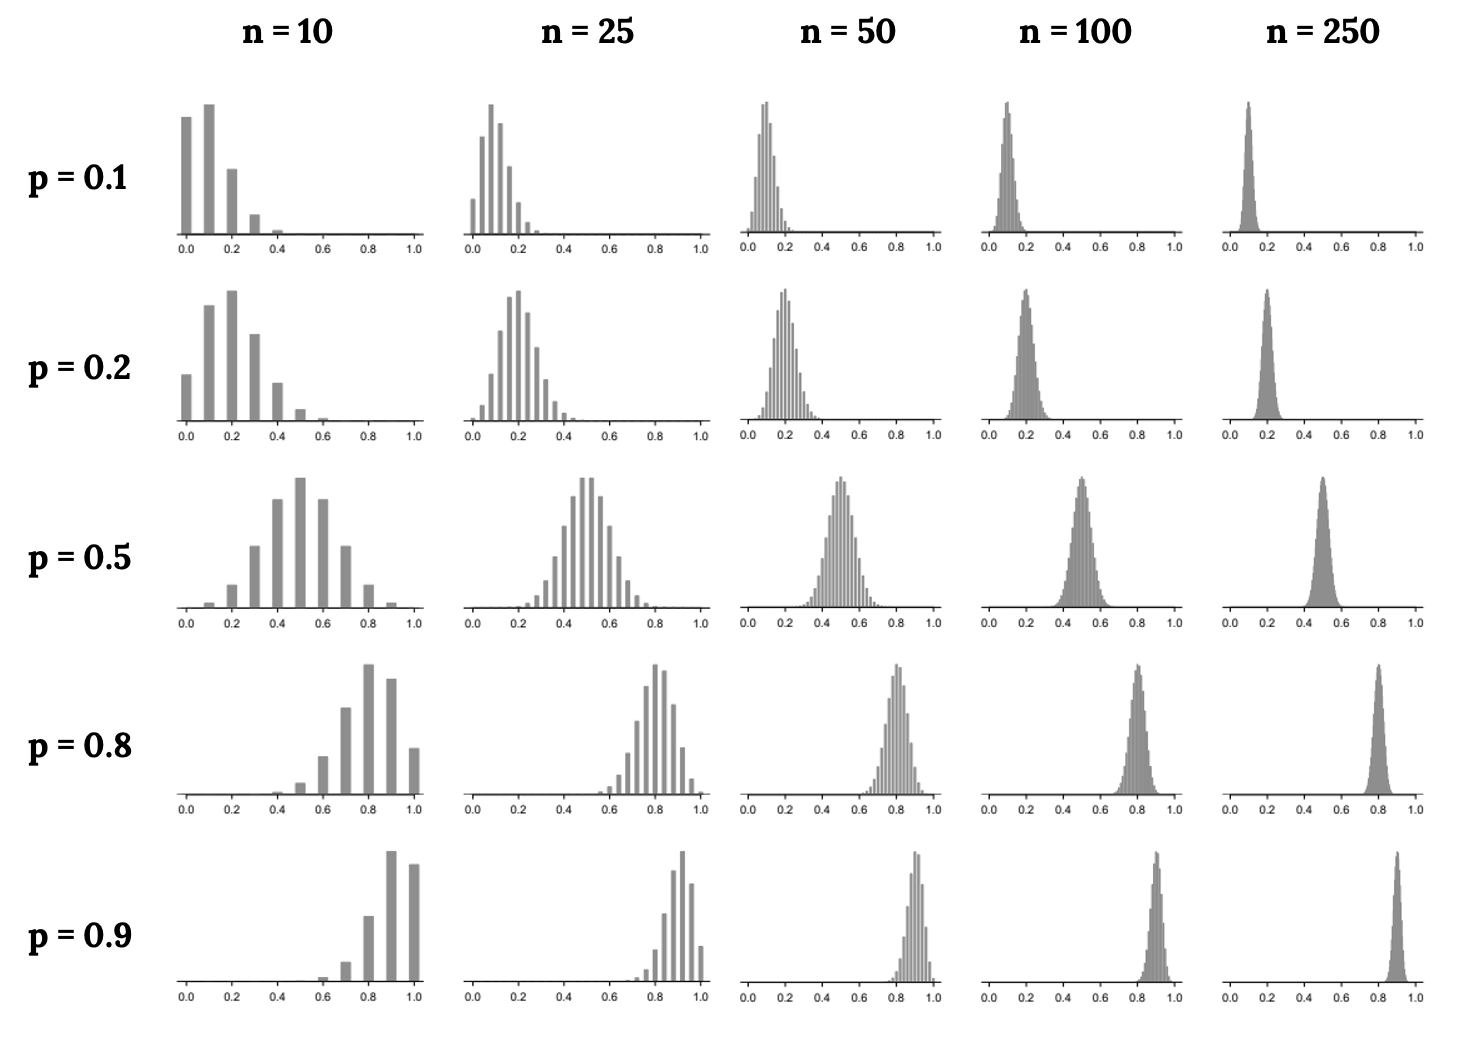 20 different bar charts showing that as sample size increases, the bell curve shape and narrowness of the curve increases. These graphs also show that as p increases, the graph shifts from right skewed (p=0.1) to normal (p=0.5) to left skewed (p=0.9).